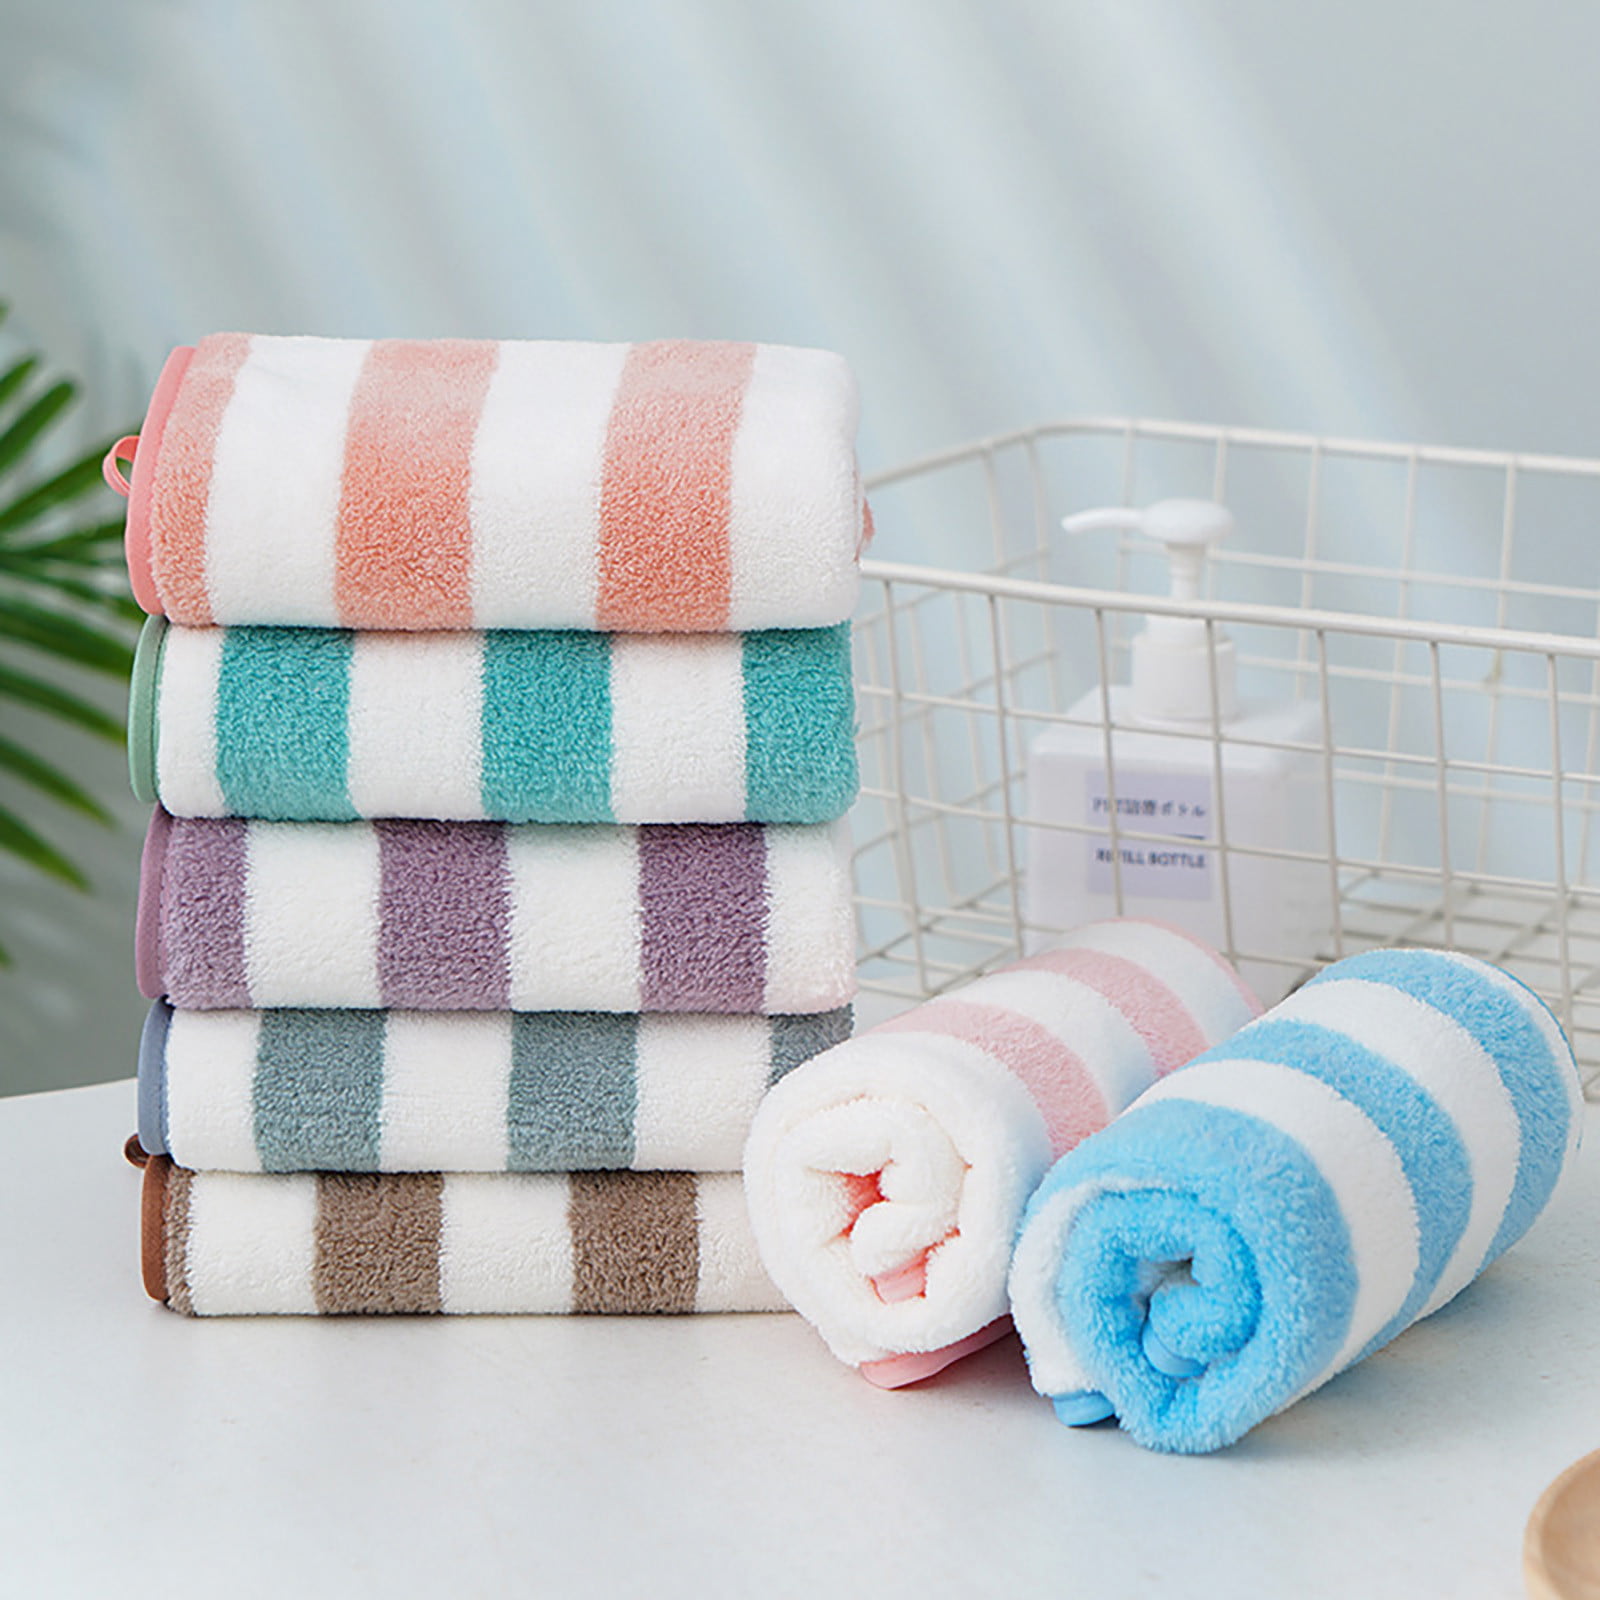 Ewanda Store 3 Pack Cute Hand Towels,Hand Towels with Hanging Loop,Kids Hanging Hand Towels for Kitchen Bathroom Home